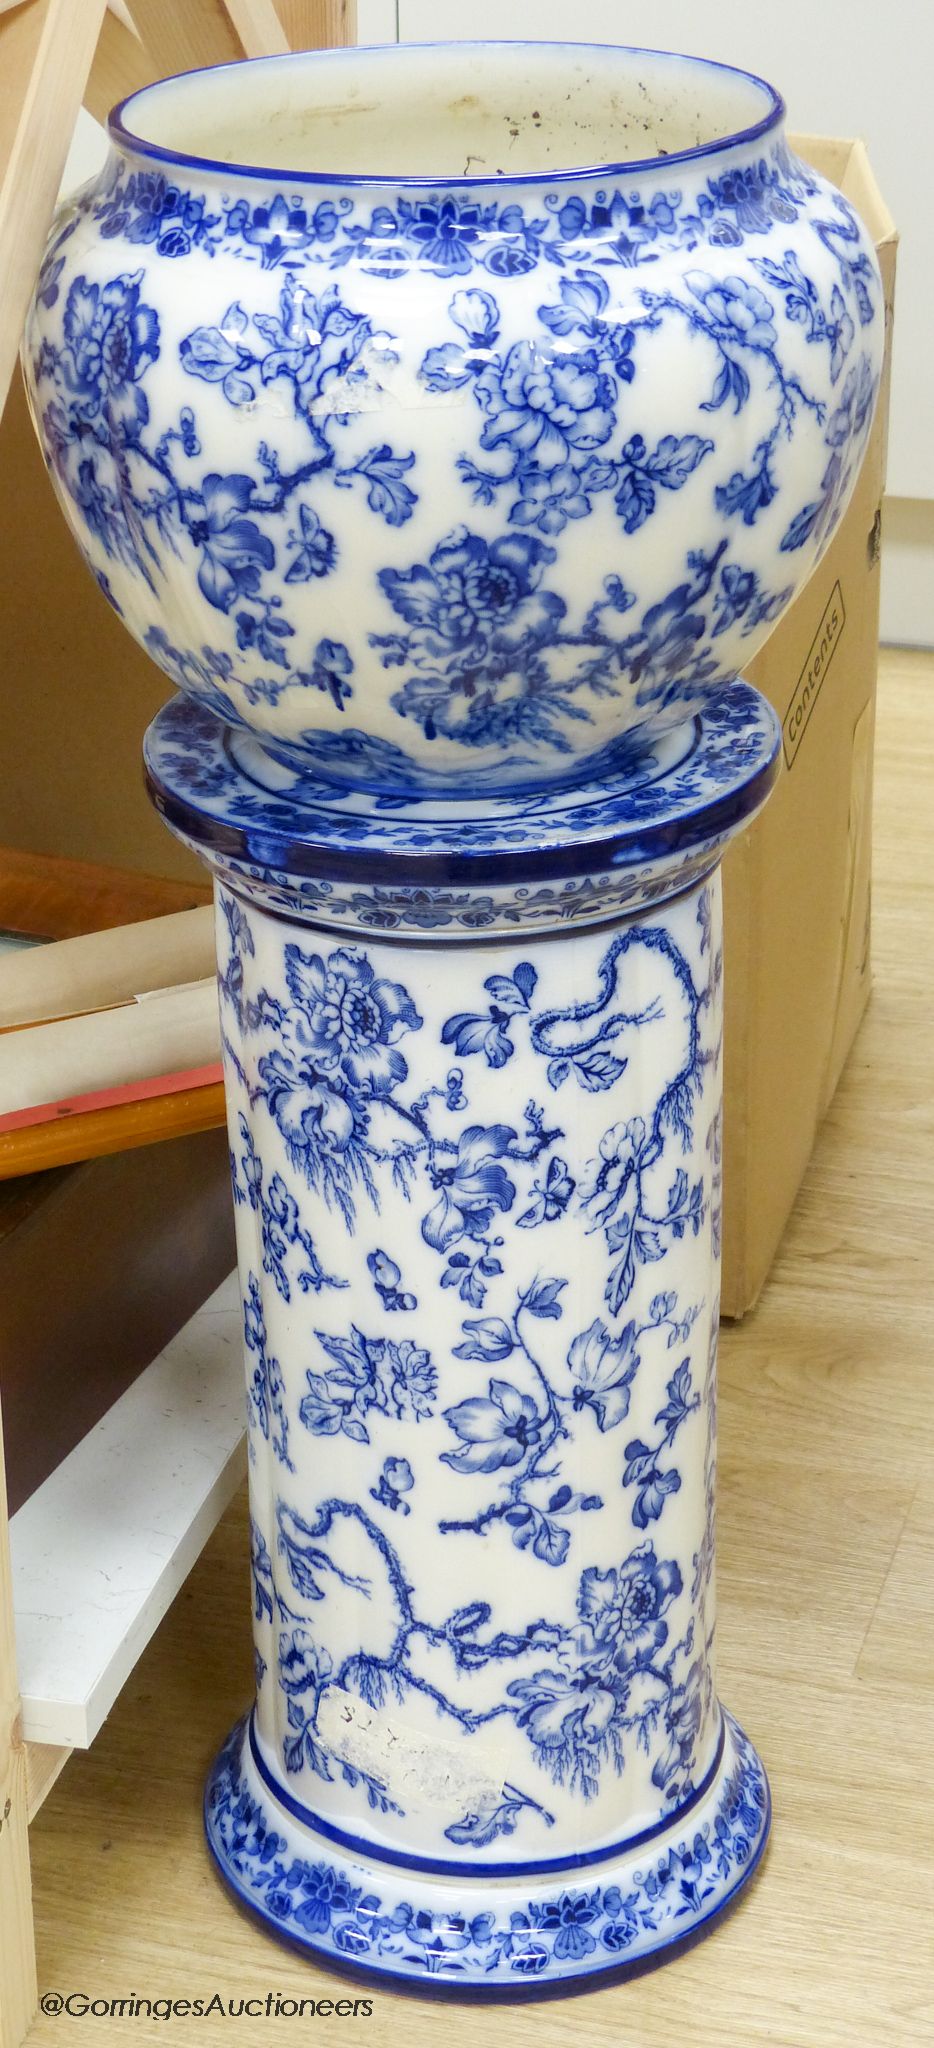 A Wedgwood Etruria England Swallow blue and white jardiniere and stand, height 79cm